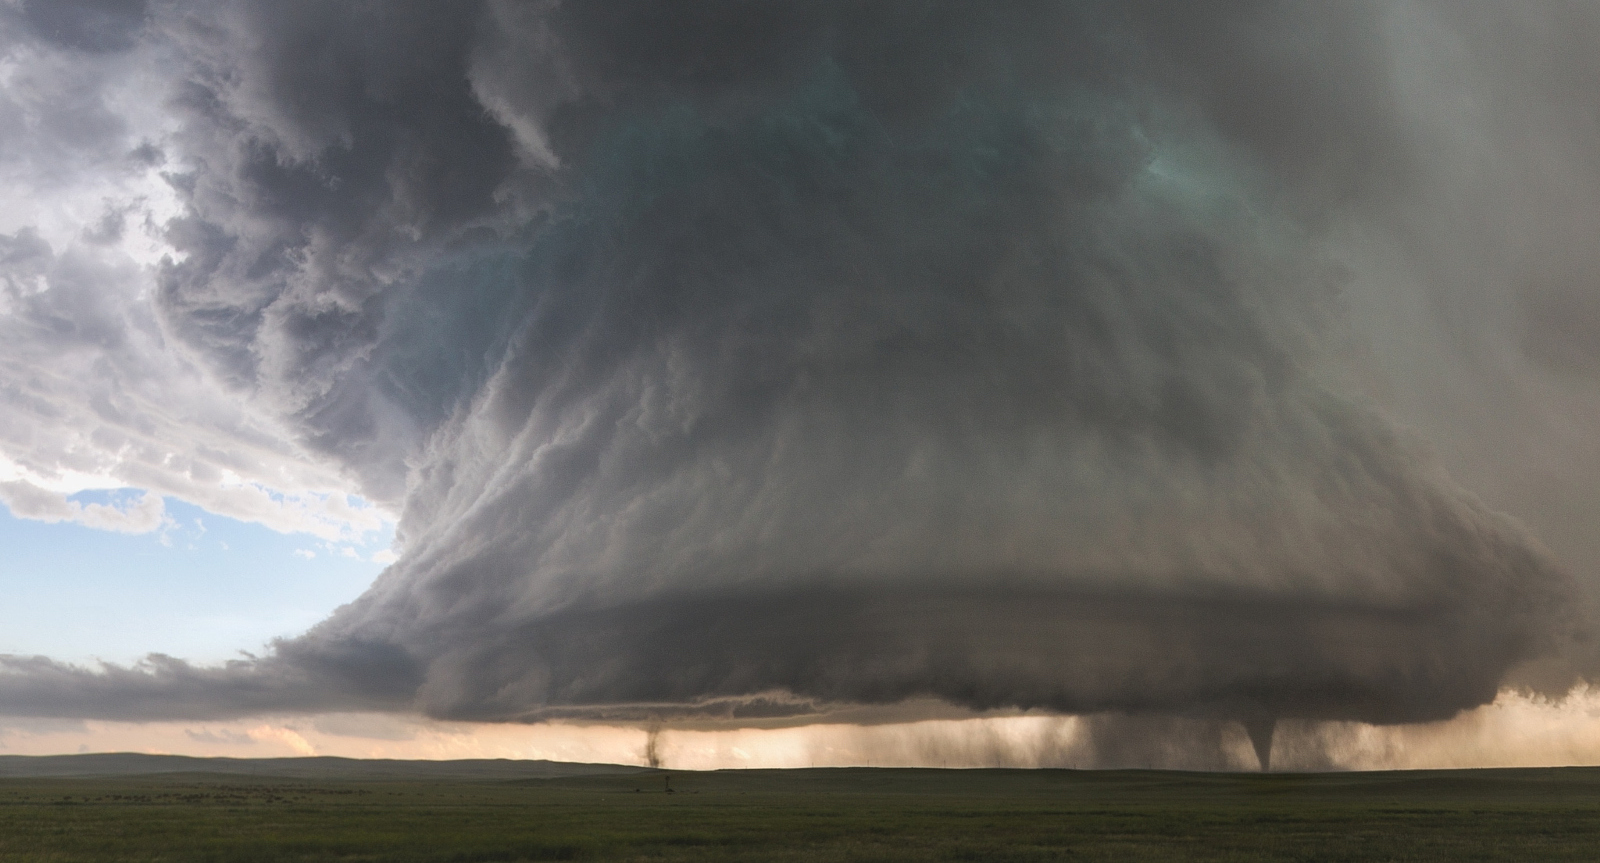 Storm Chaser Kelly DeLay Just Captured the Shot of a Lifetime